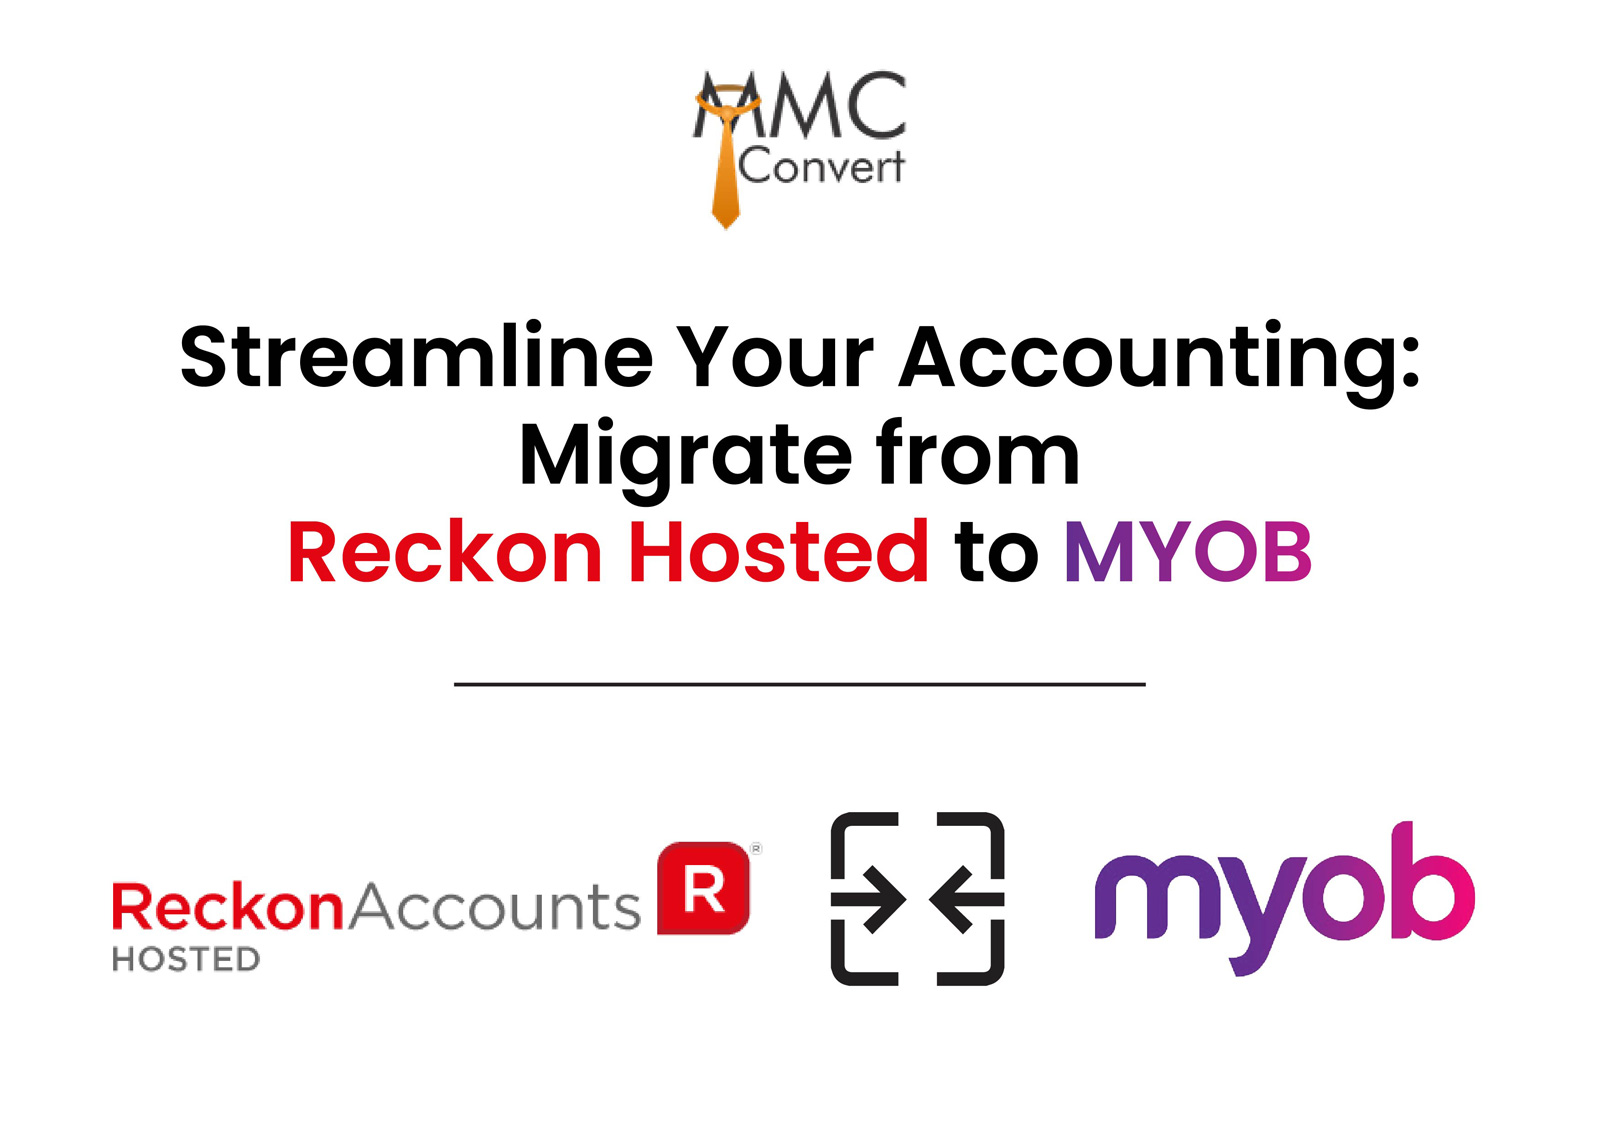 Streamline Your Accounting: Migrate from Reckon Hosted to MYOB